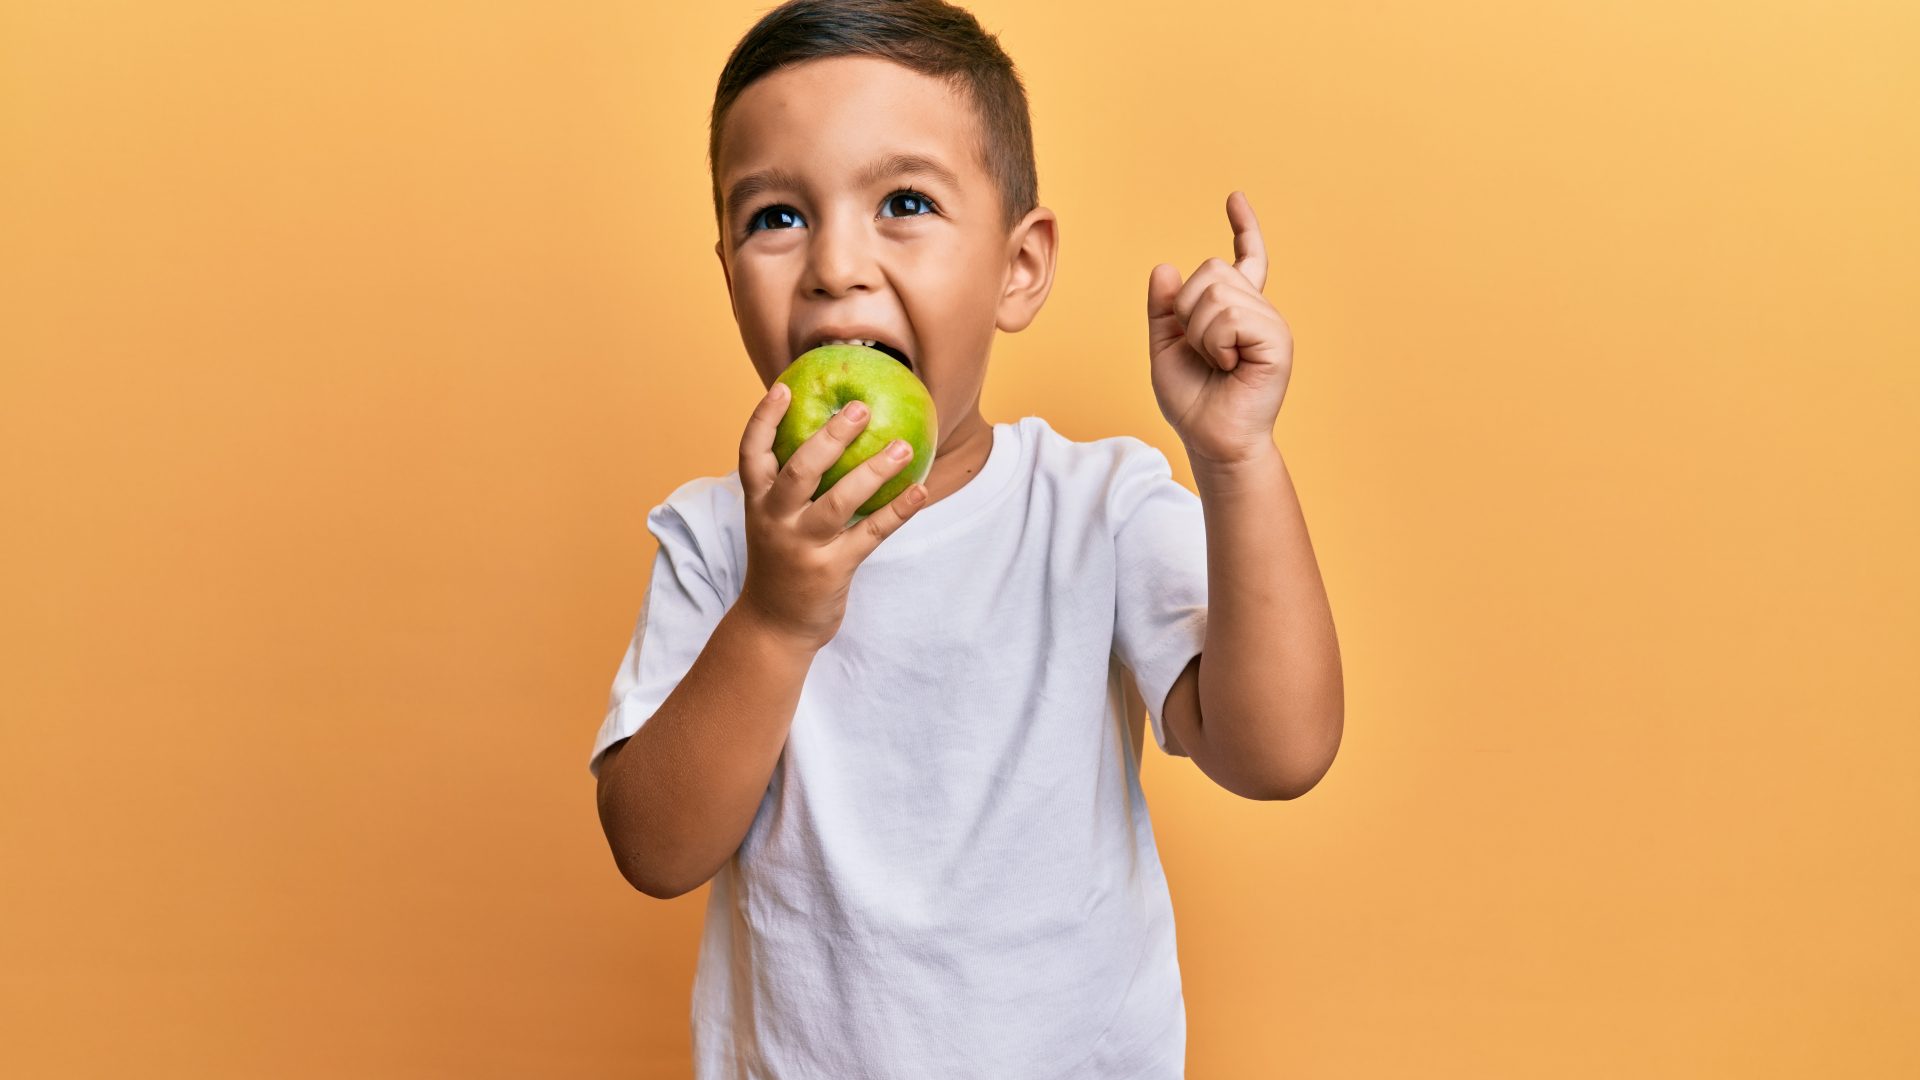 Adorable,Latin,Toddler,Smiling,Happy,Eating,Green,Apple,Looking,To